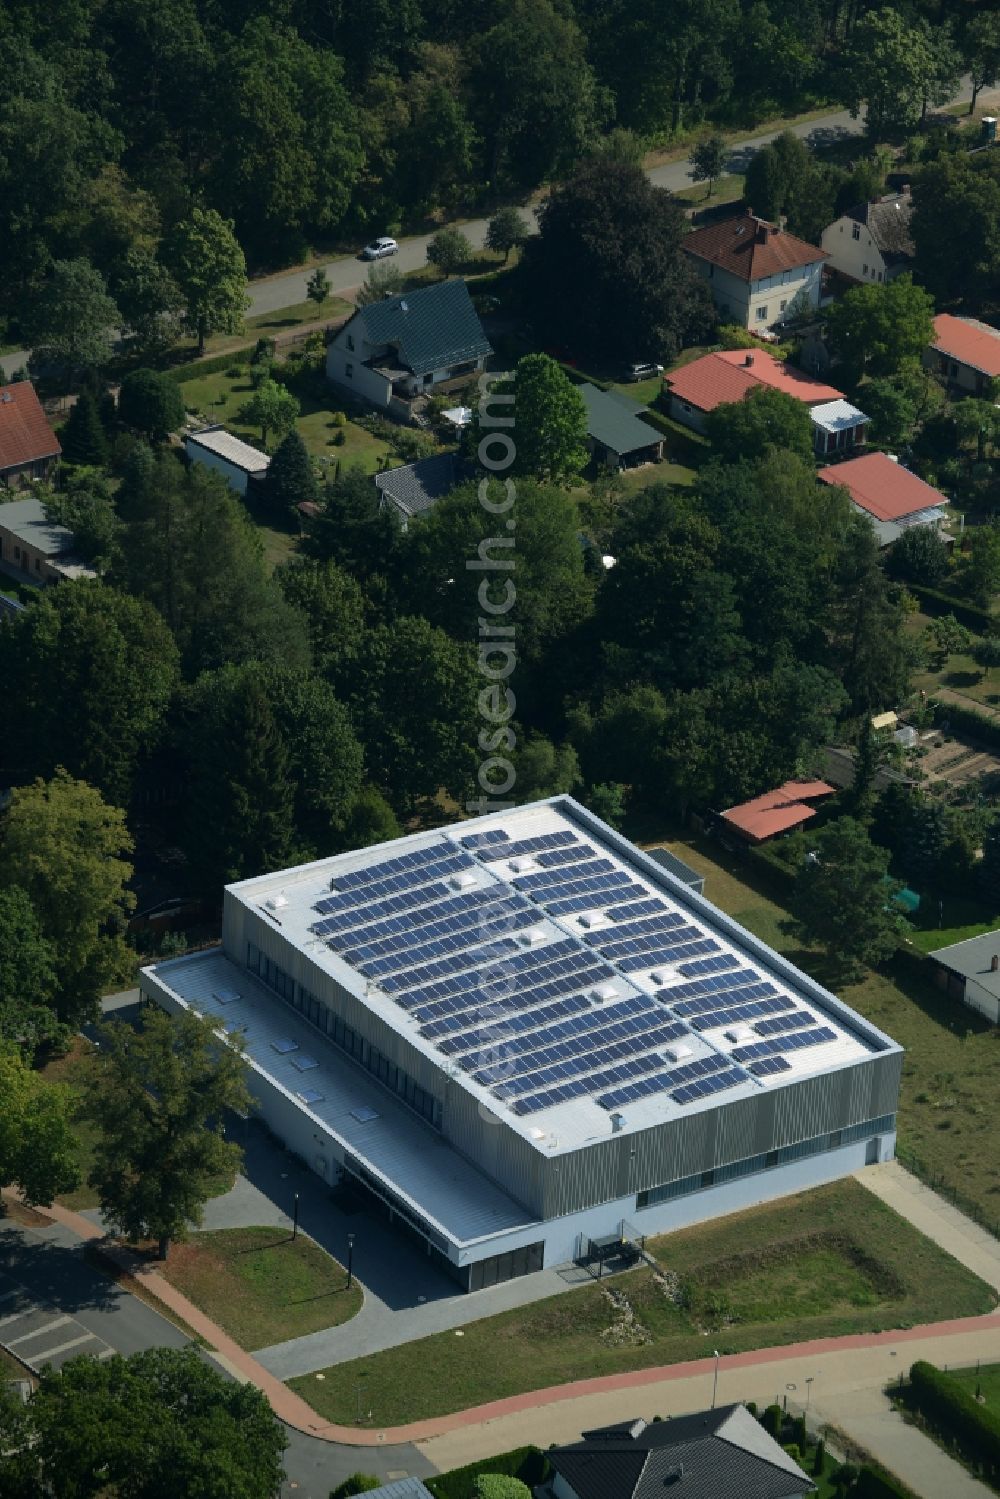 Aerial image Grünheide (Mark) - Building of the sports and multi-functional hall Mueggelspreehalle in the Hangelsberg part of Gruenheide (Mark) in the state of Brandenburg. The architectural distinct hall is used for sports events and is the home pitch of SG Hangelsberg 47 e.V